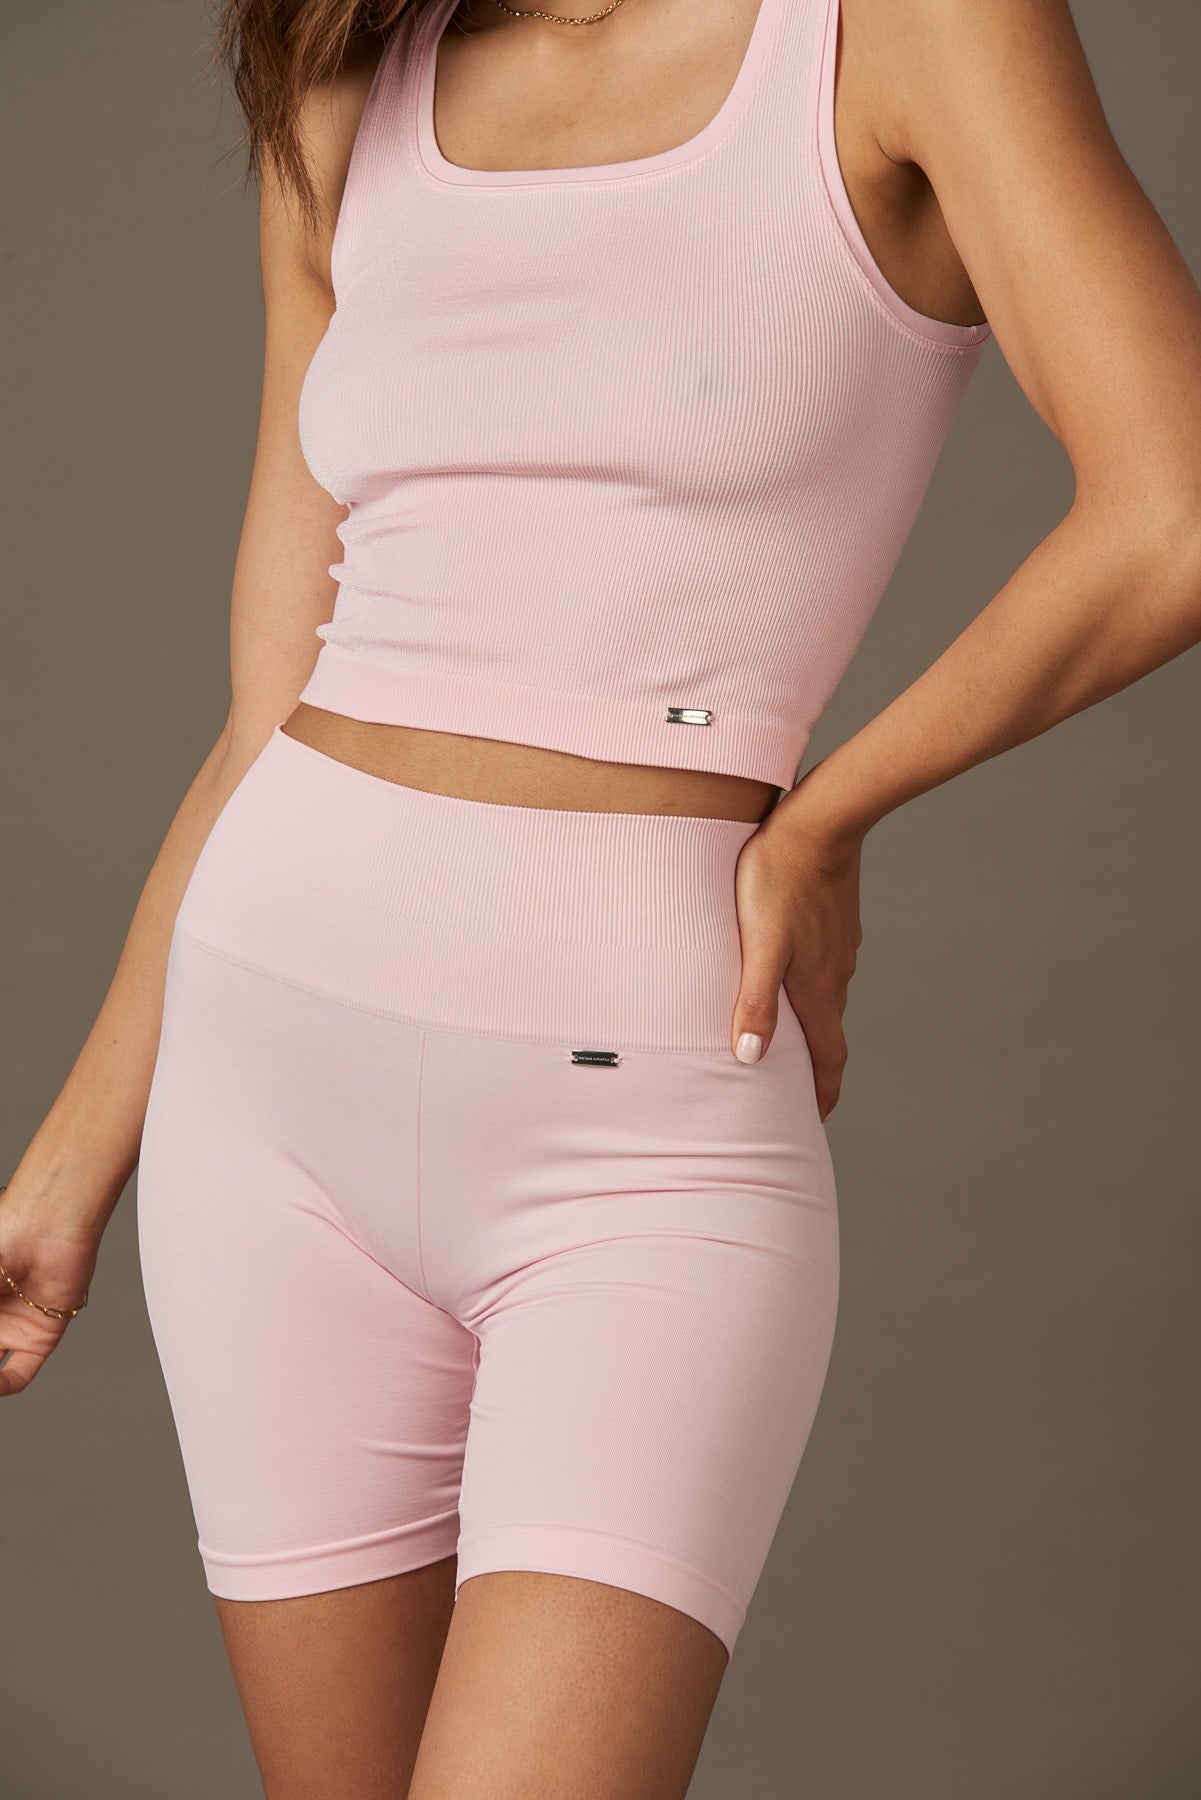 Gleam Top in Ice Pink-Tops-Shop Clothing Sustainable Recycled Yoga Leggings Women On-line Barcelona Believe Athletics Sustainable Recycled Yoga Clothes